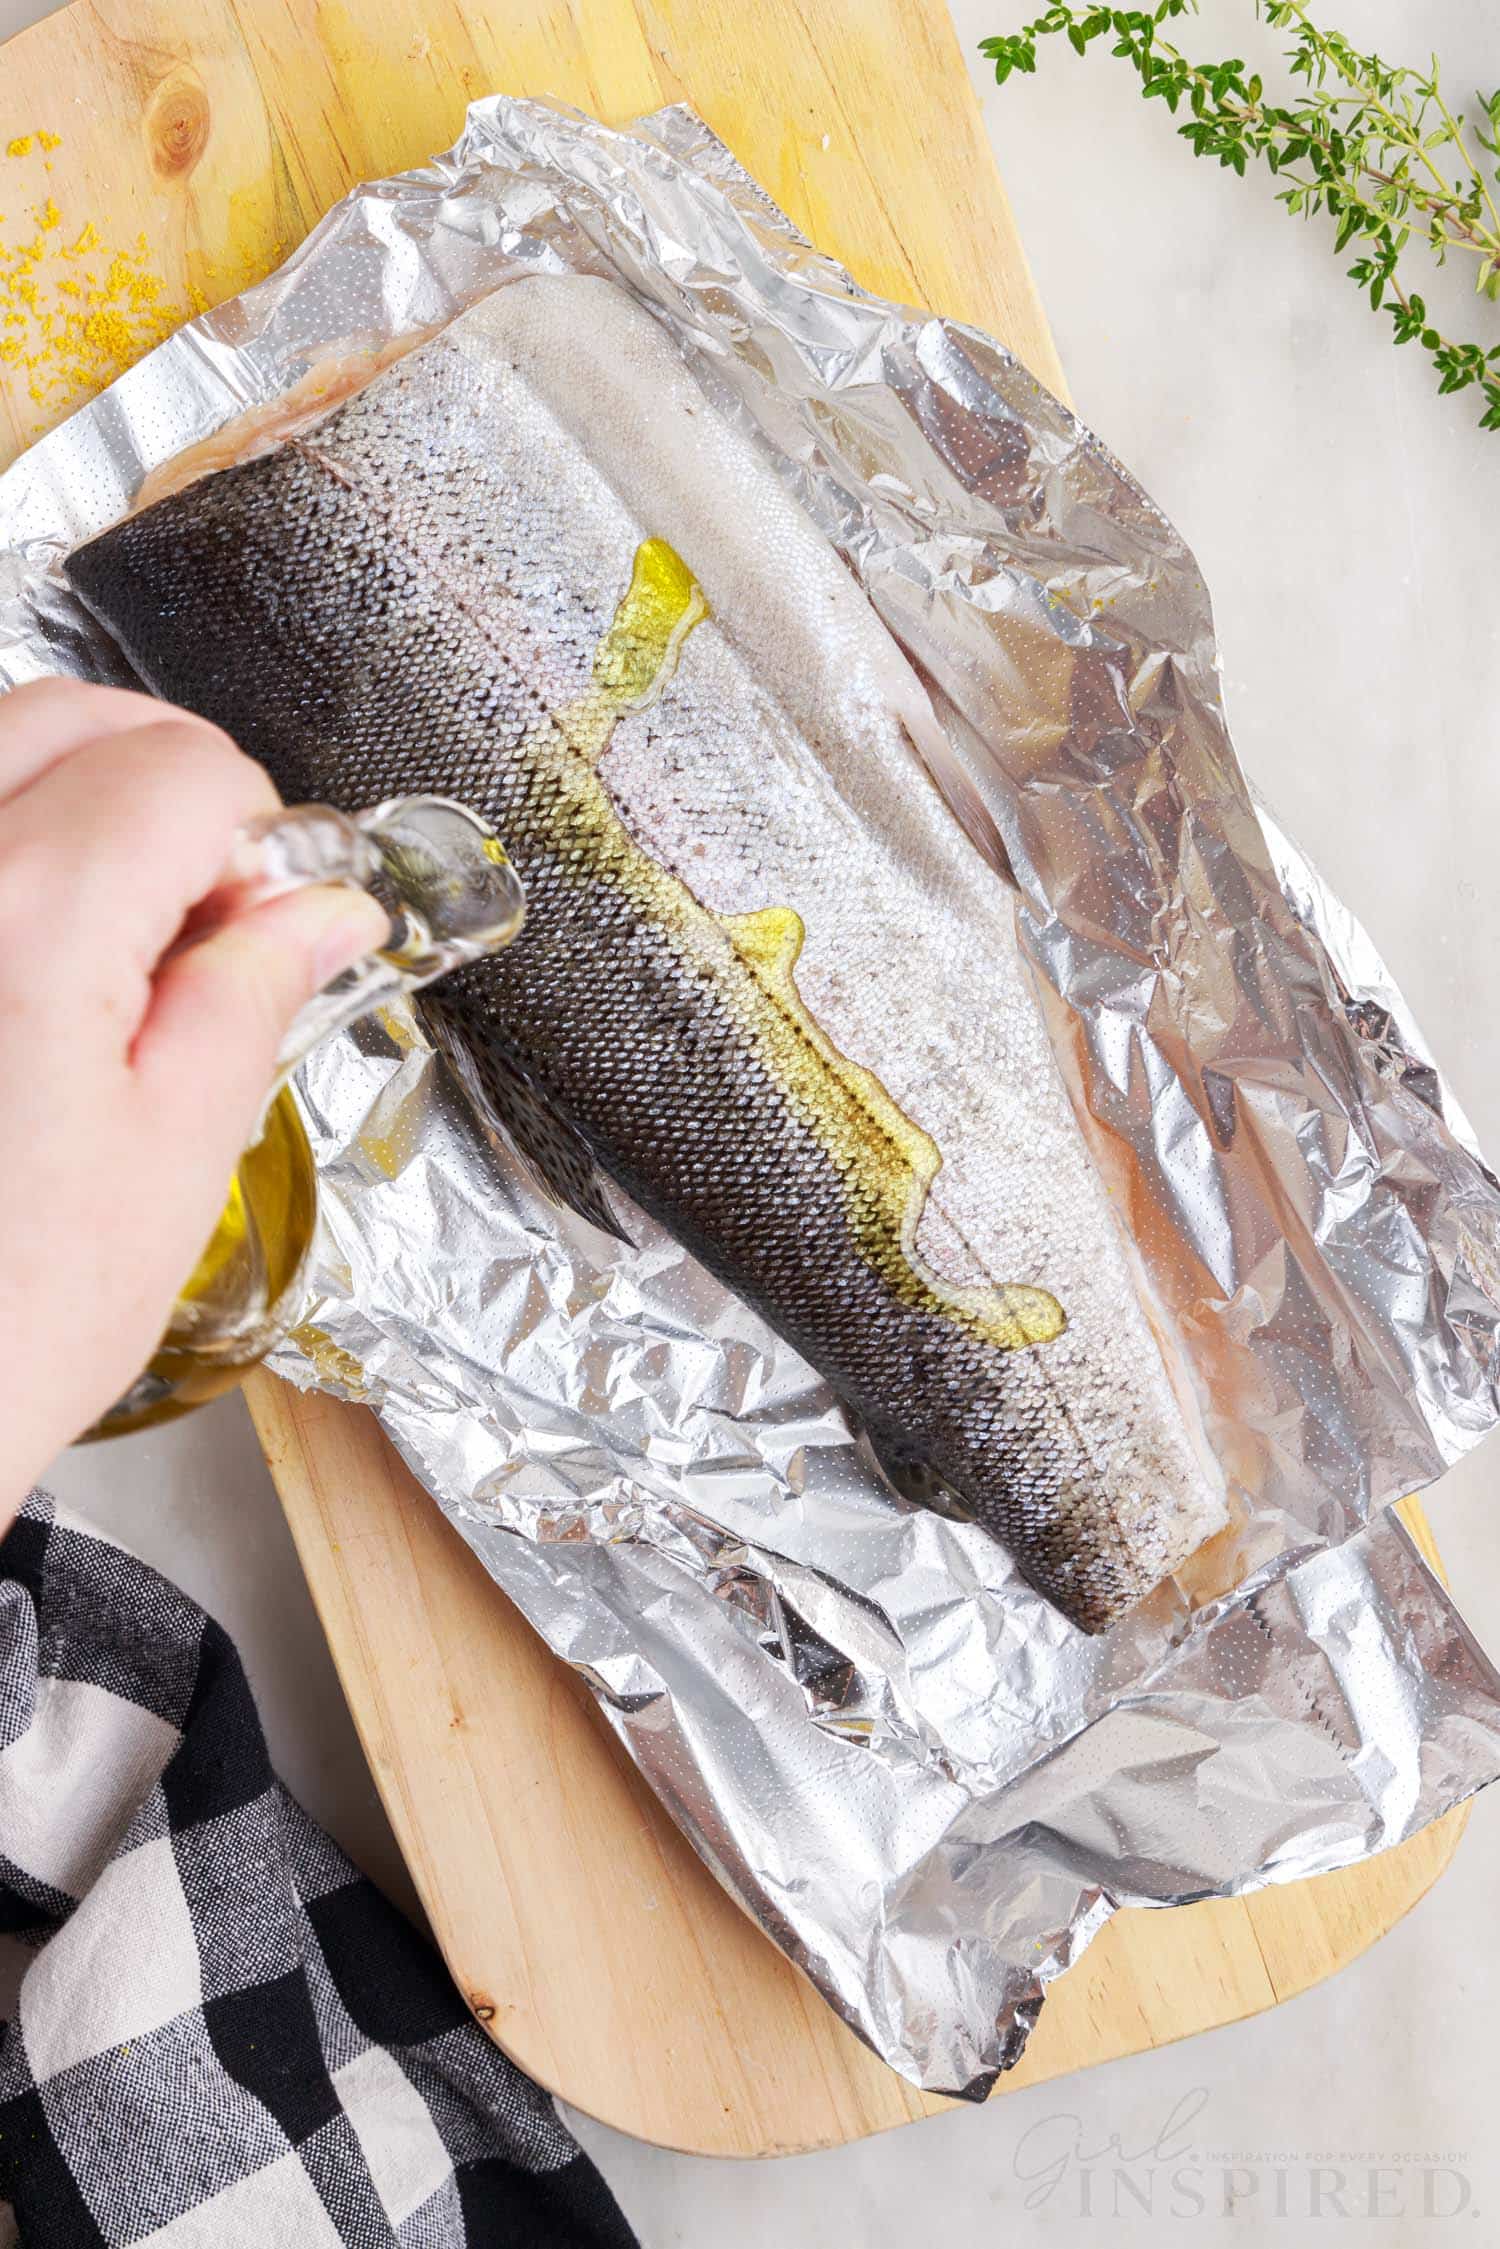 Oil being poured on trout in foil.